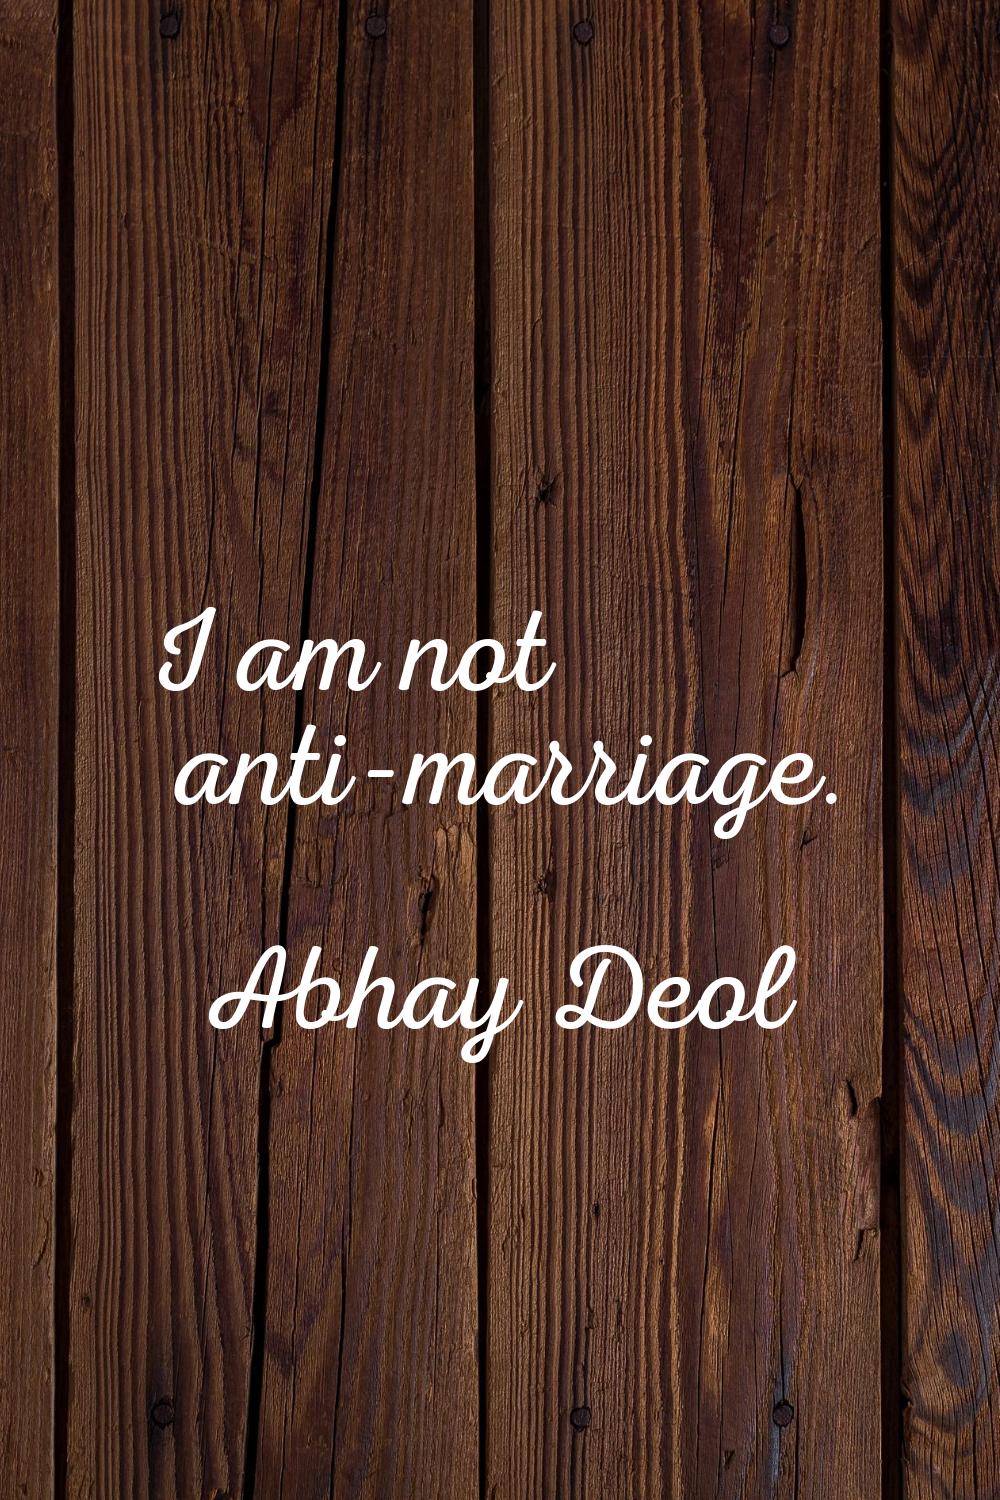 I am not anti-marriage.